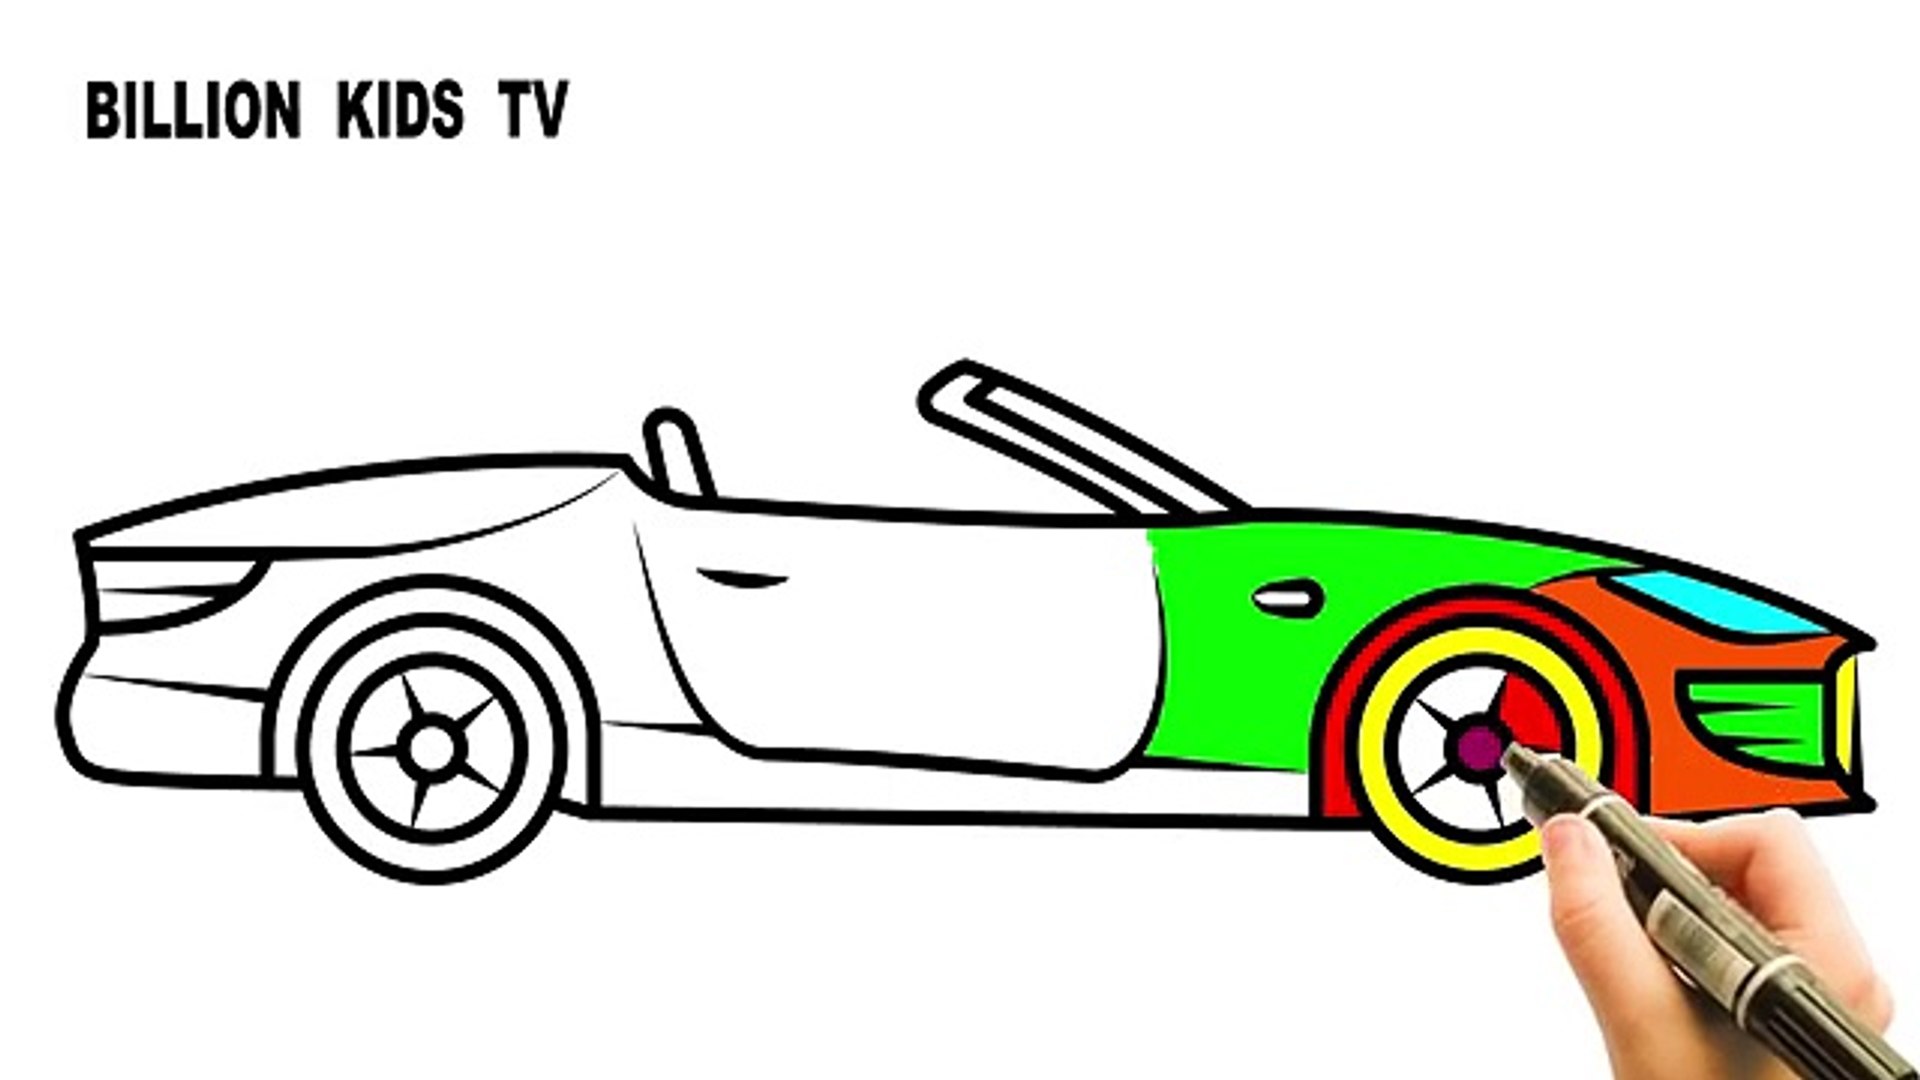 Convertible Car Coloring Pages Cabriolet Car Colors For Kids With Vehicles Video Coloring Video Video Dailymotion